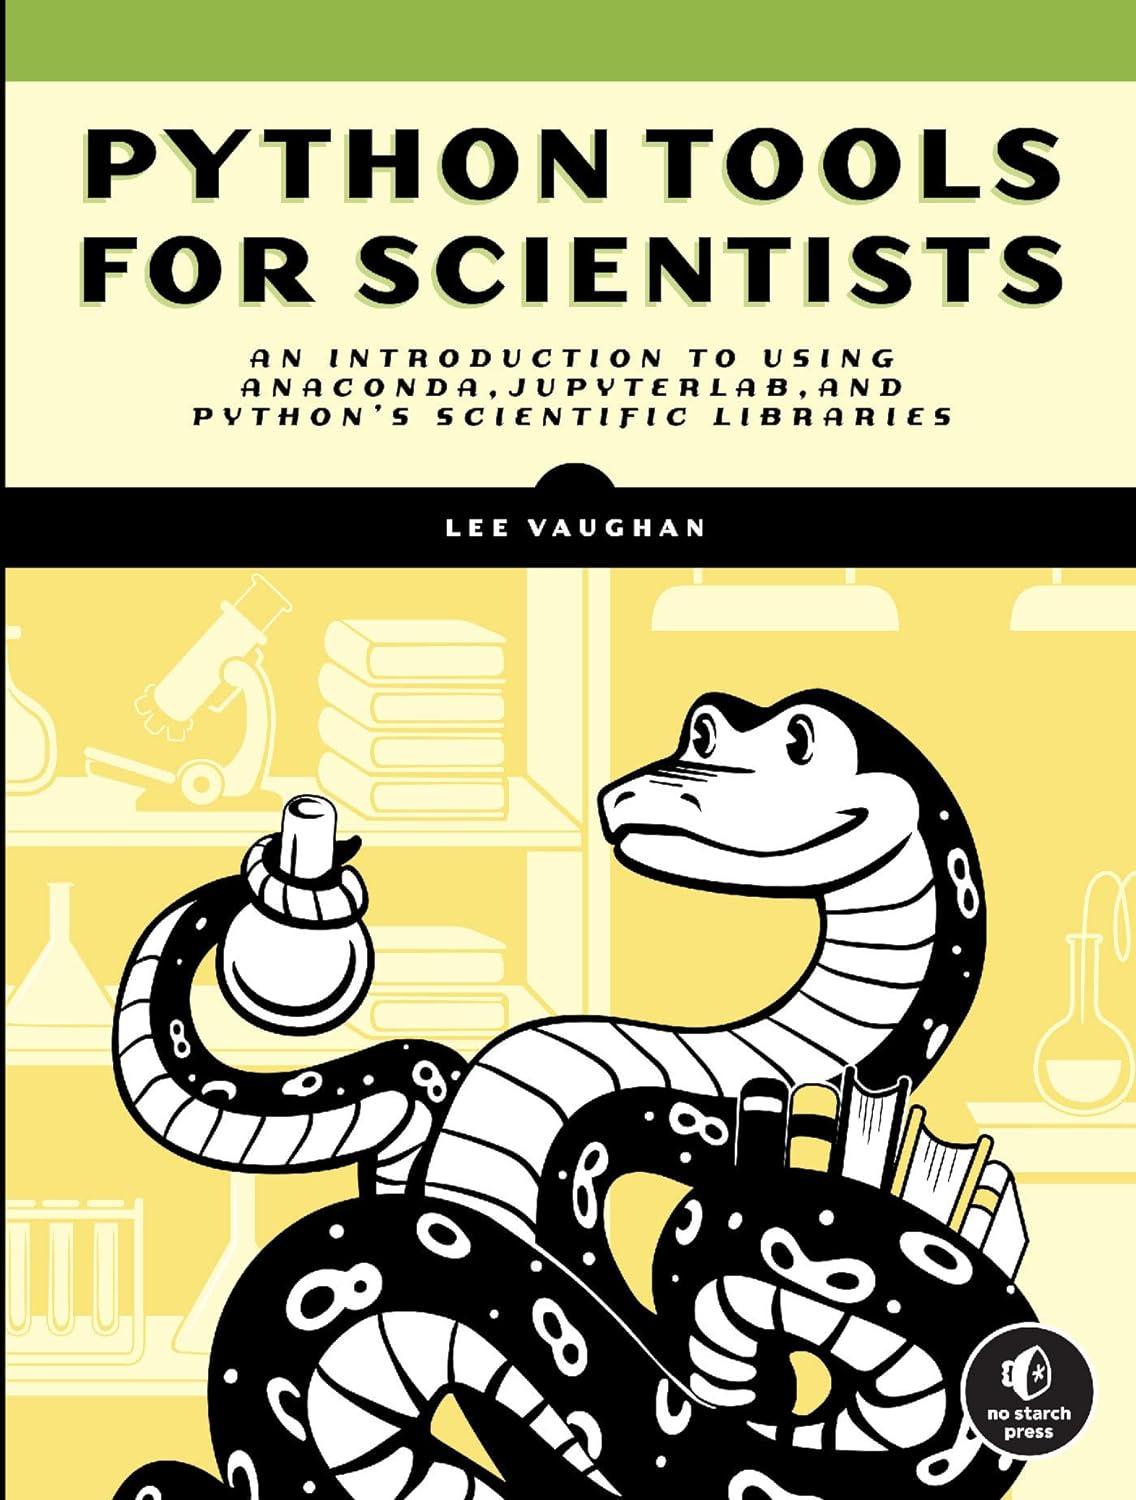 python tools for scientists an introduction to using anaconda jupyterlab and python's scientific libraries